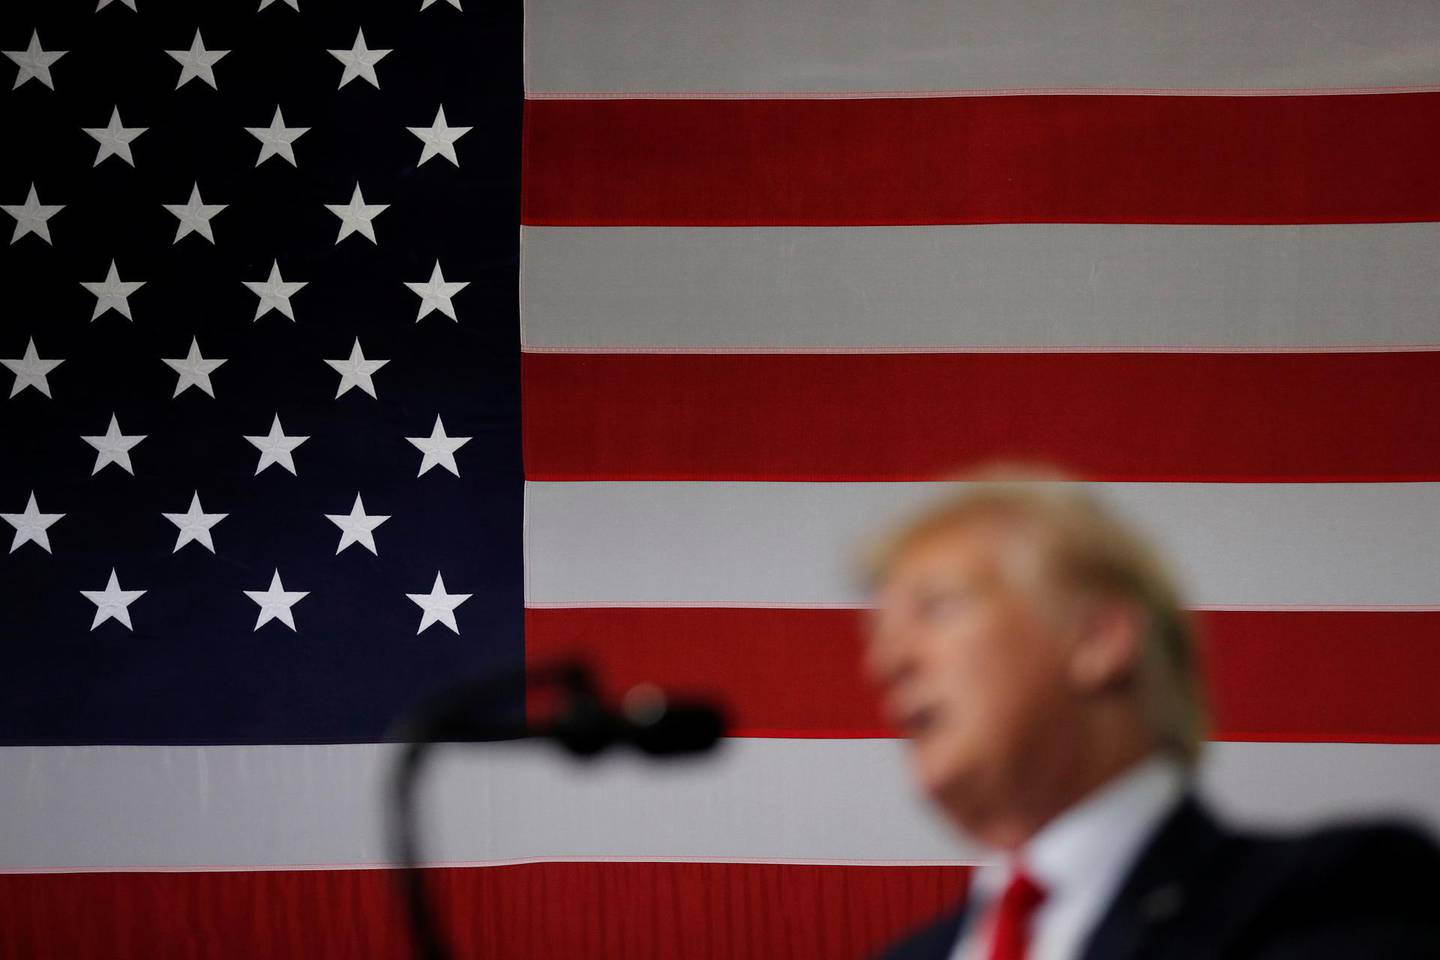 With a U.S. flag as a backdrop, U.S. President Donald Trump delivers remarks on supporting the passage of the U.S.-Mexico-Canada (USMCA) trade deal during a visit to Derco Aerospace Inc., a Lockheed Martin subsidiary, in Milwaukee, Wisconsin, U.S., July 12, 2019. REUTERS/Carlos Barria